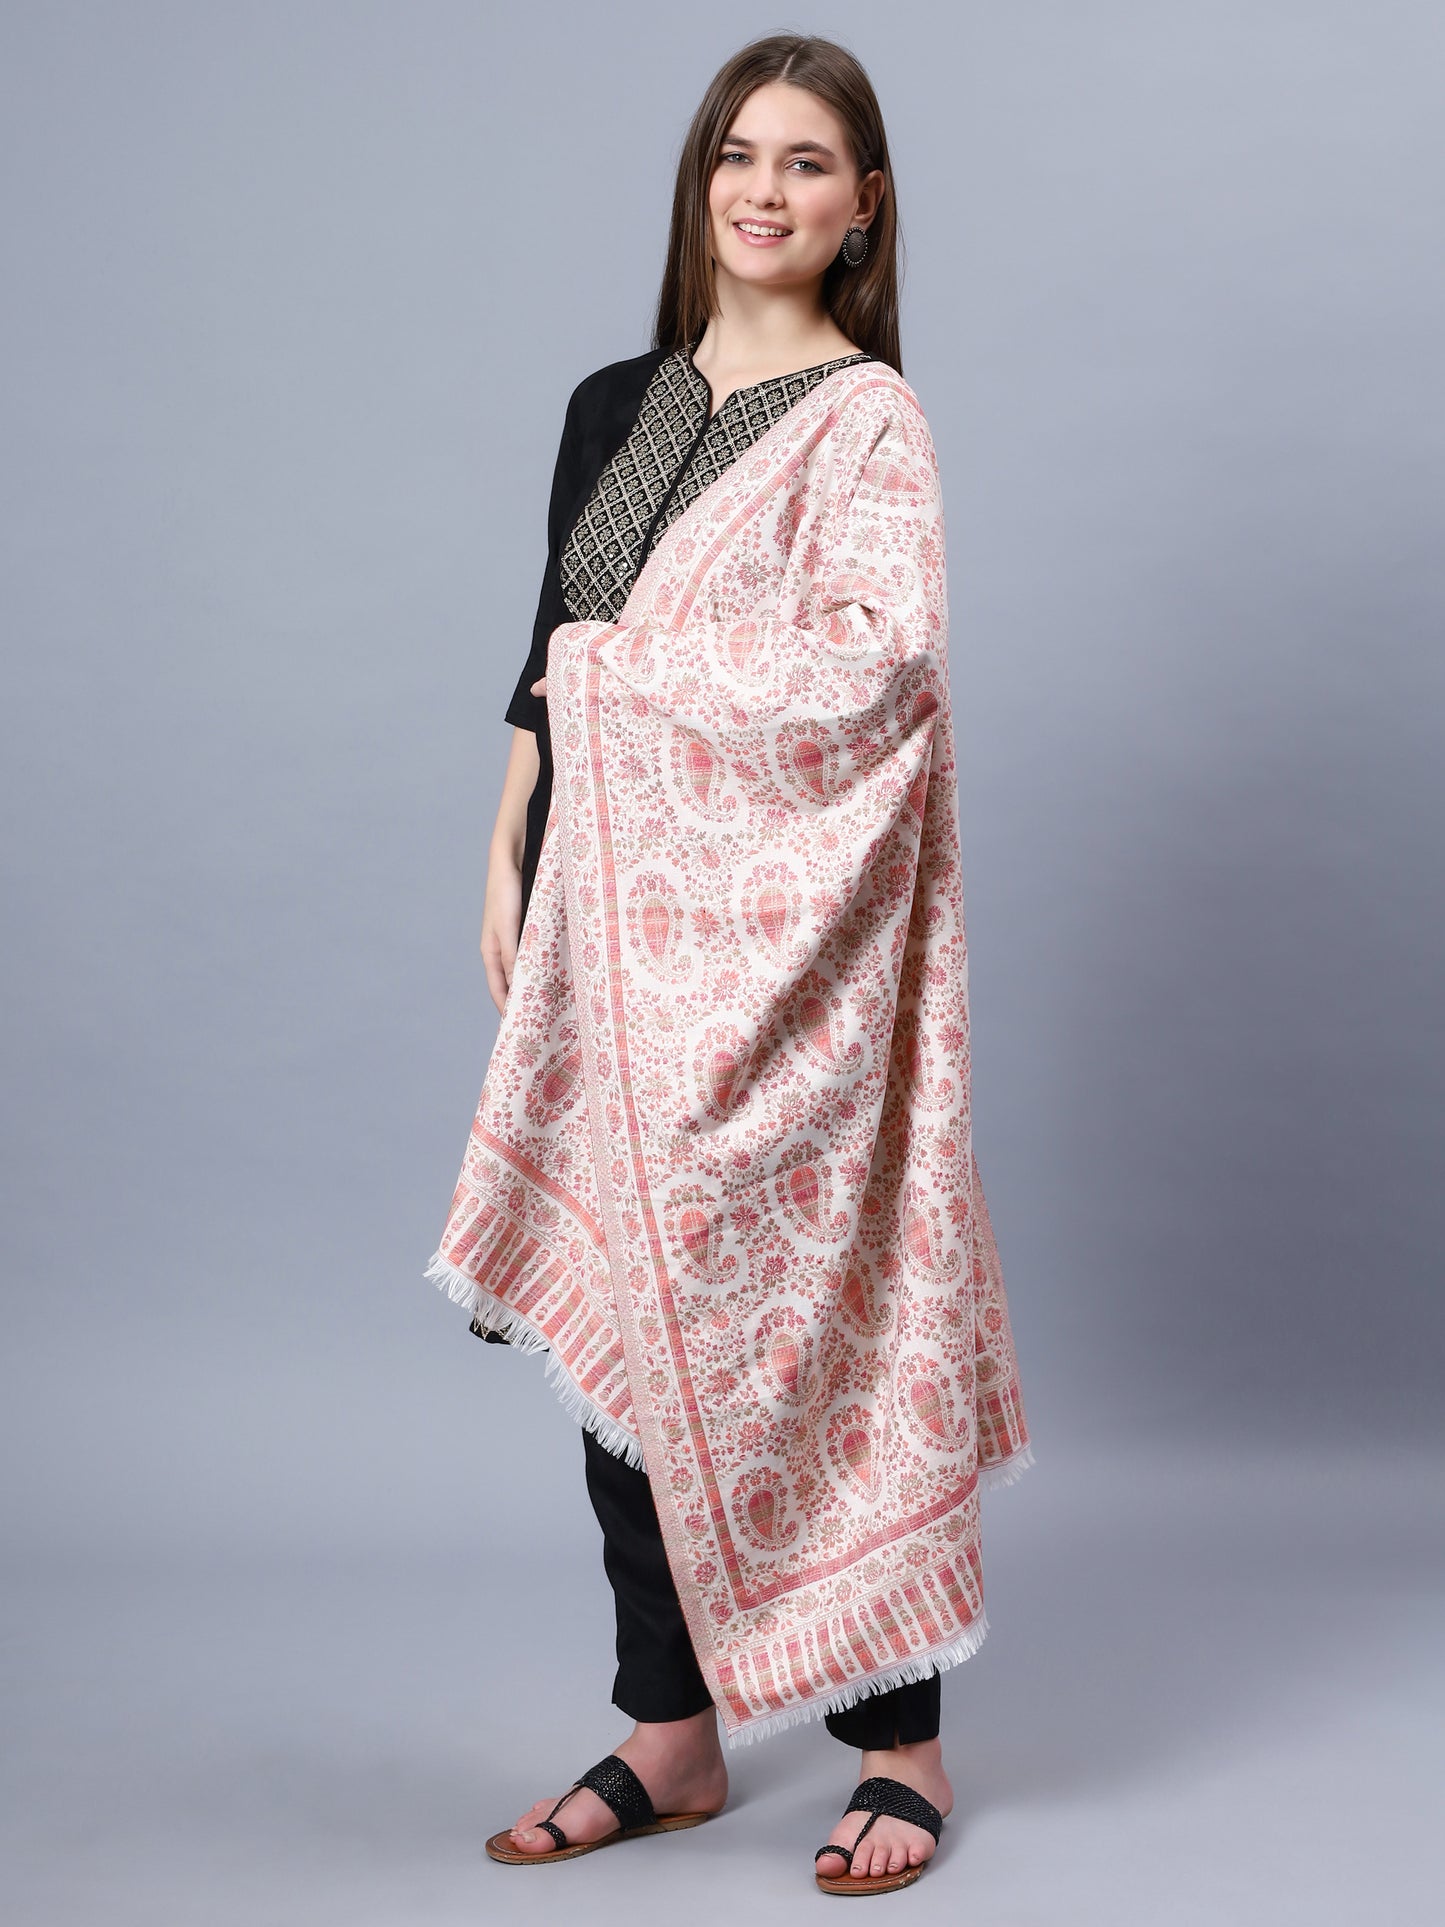 Off-white viscose stole with red paisley and floral jacquard pattern